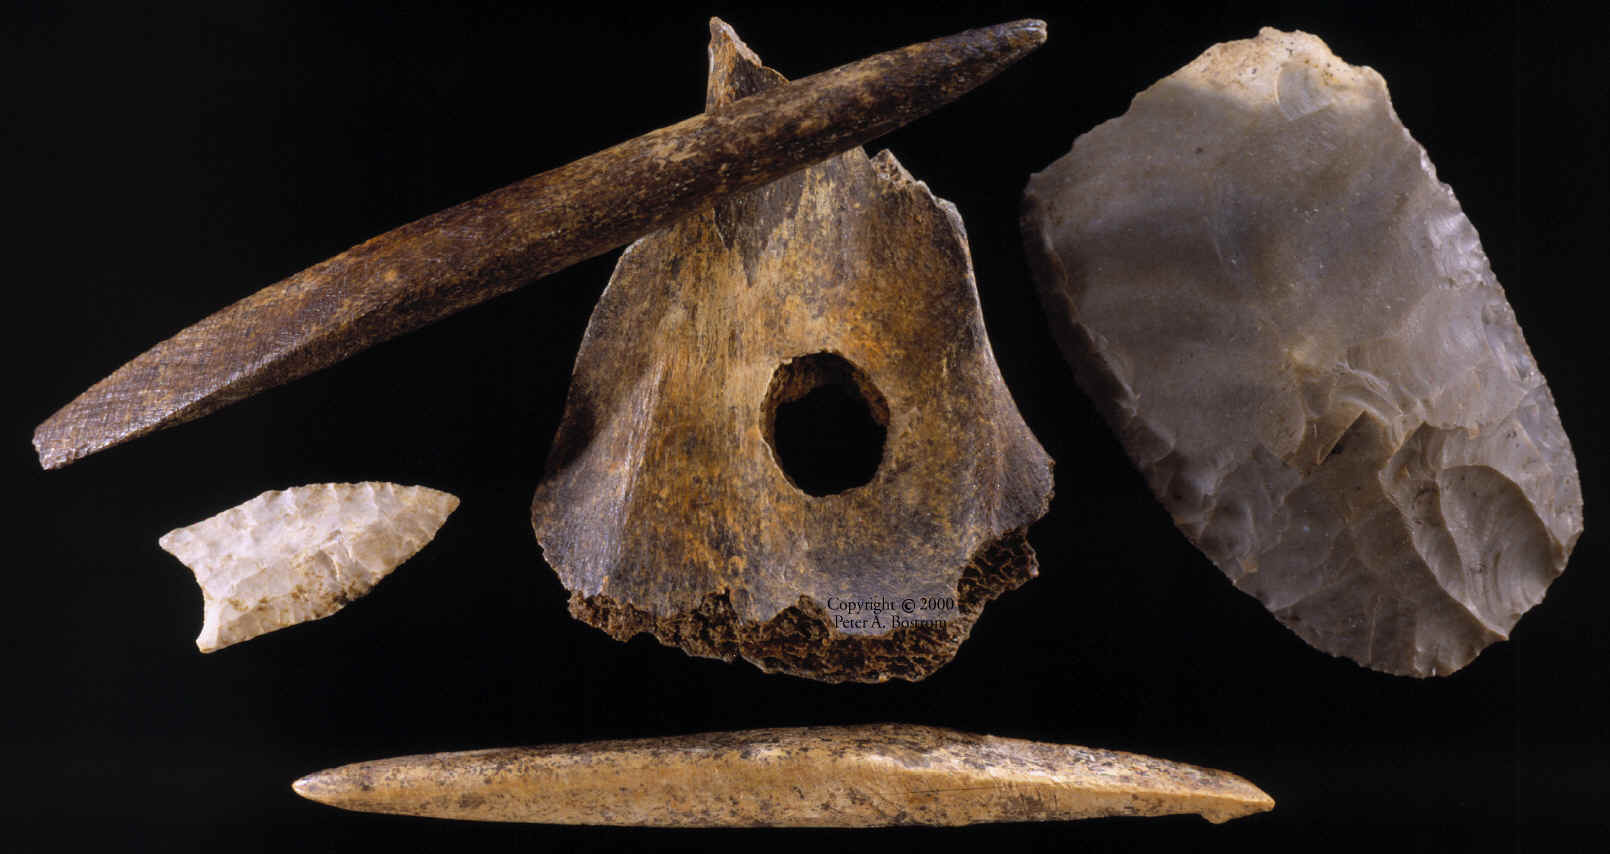 Paleo-Indian artifacts excavated from Sheriden Cave.